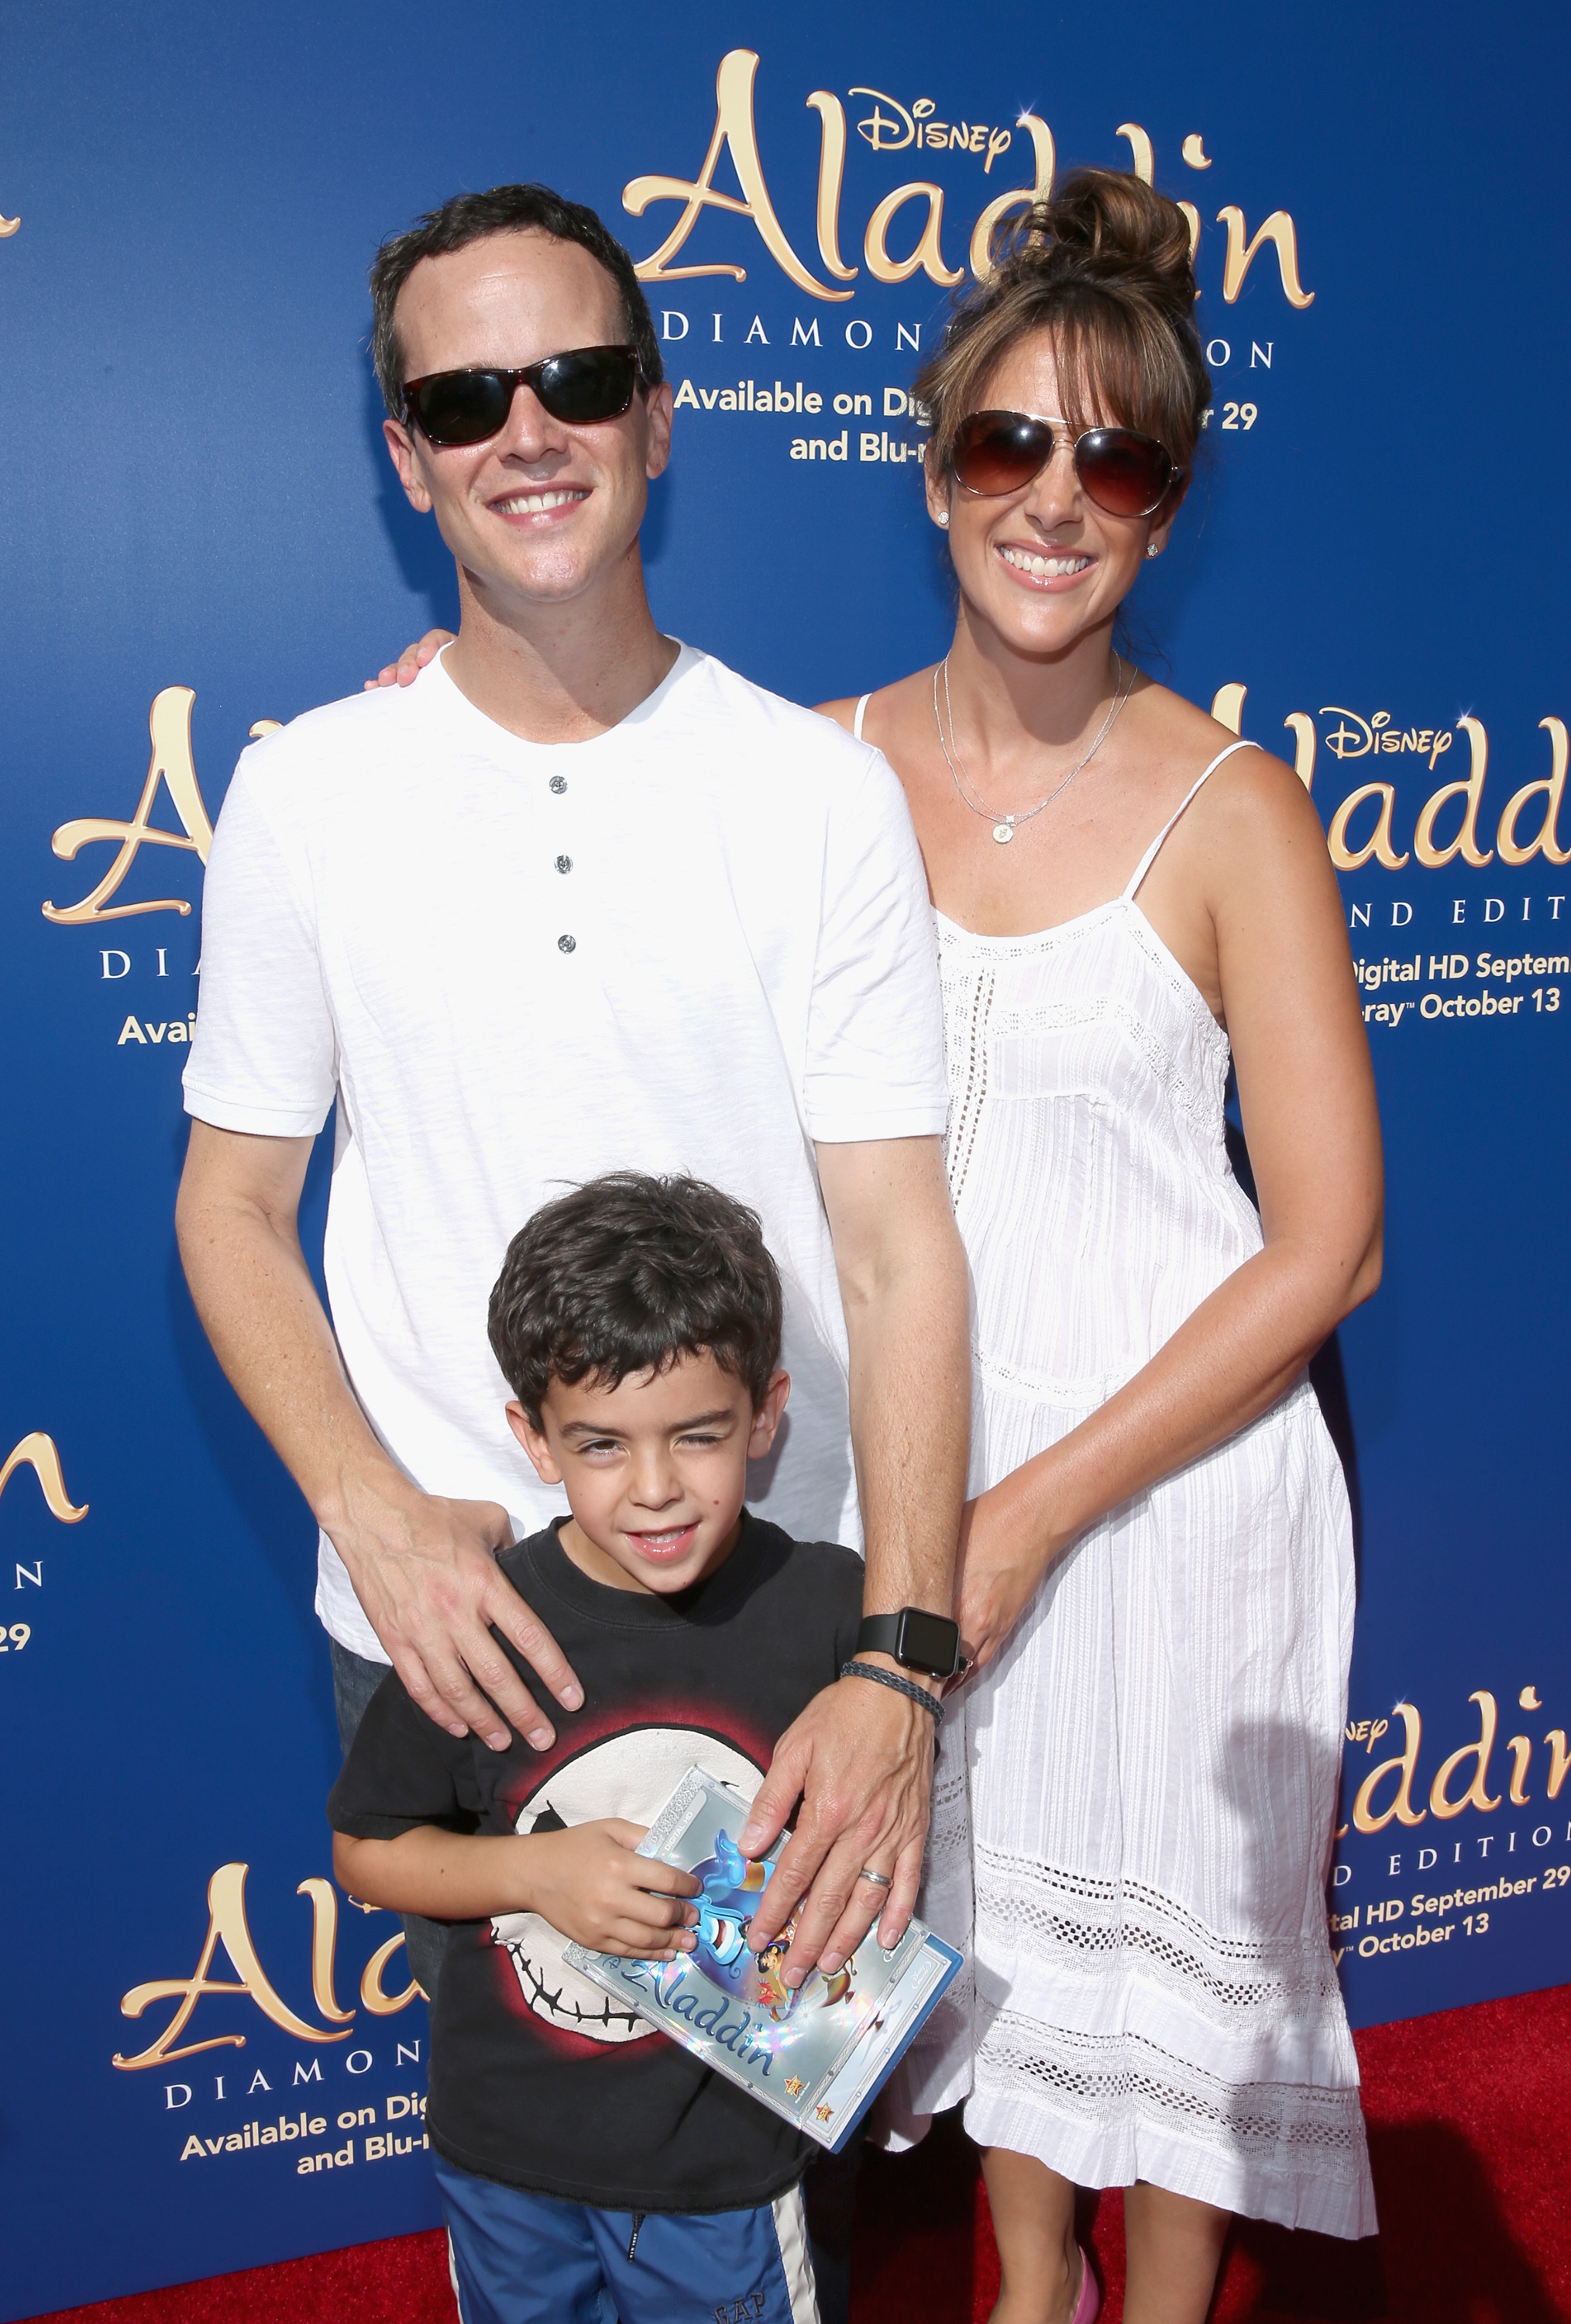 Scott Weinger, Mischa Weinger and Rina Mimoun at a special LA screening of "Aladdin" at The Walt Disney Studios on September 27, 2015 in Burbank, California. | Source: Getty Images